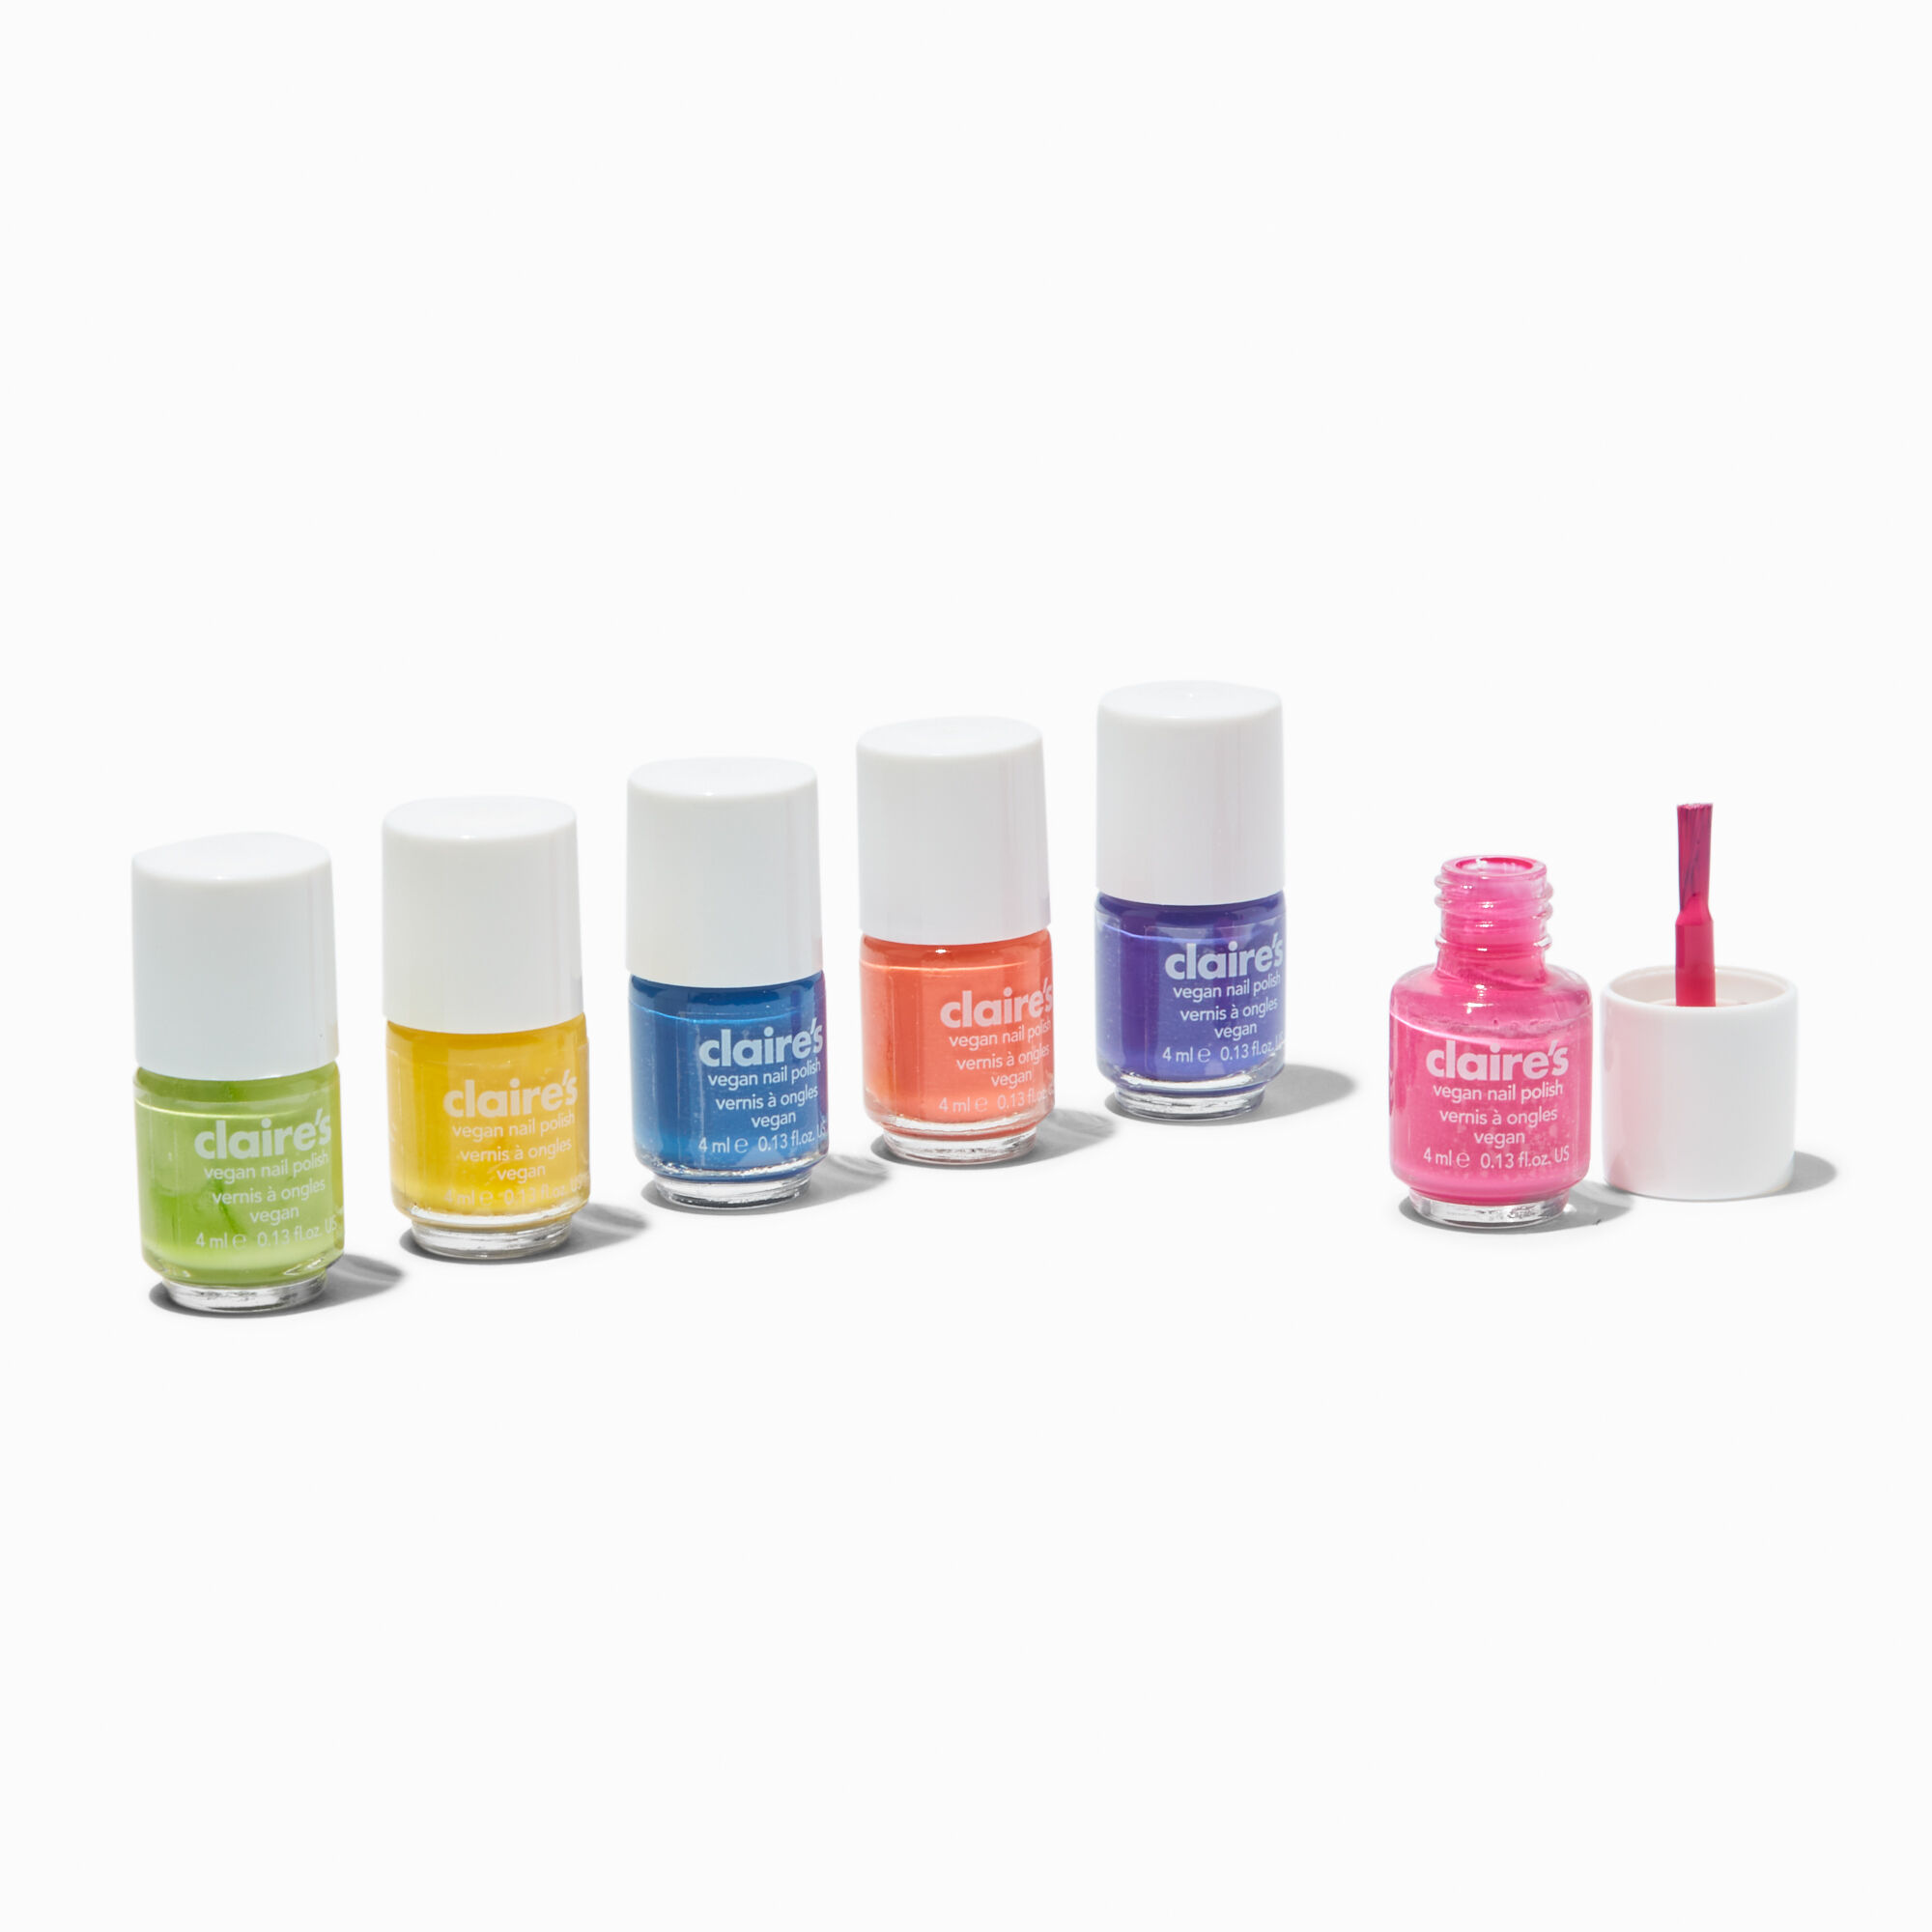 View Claires Neon Mini Nail Polish Set 6 Pack information